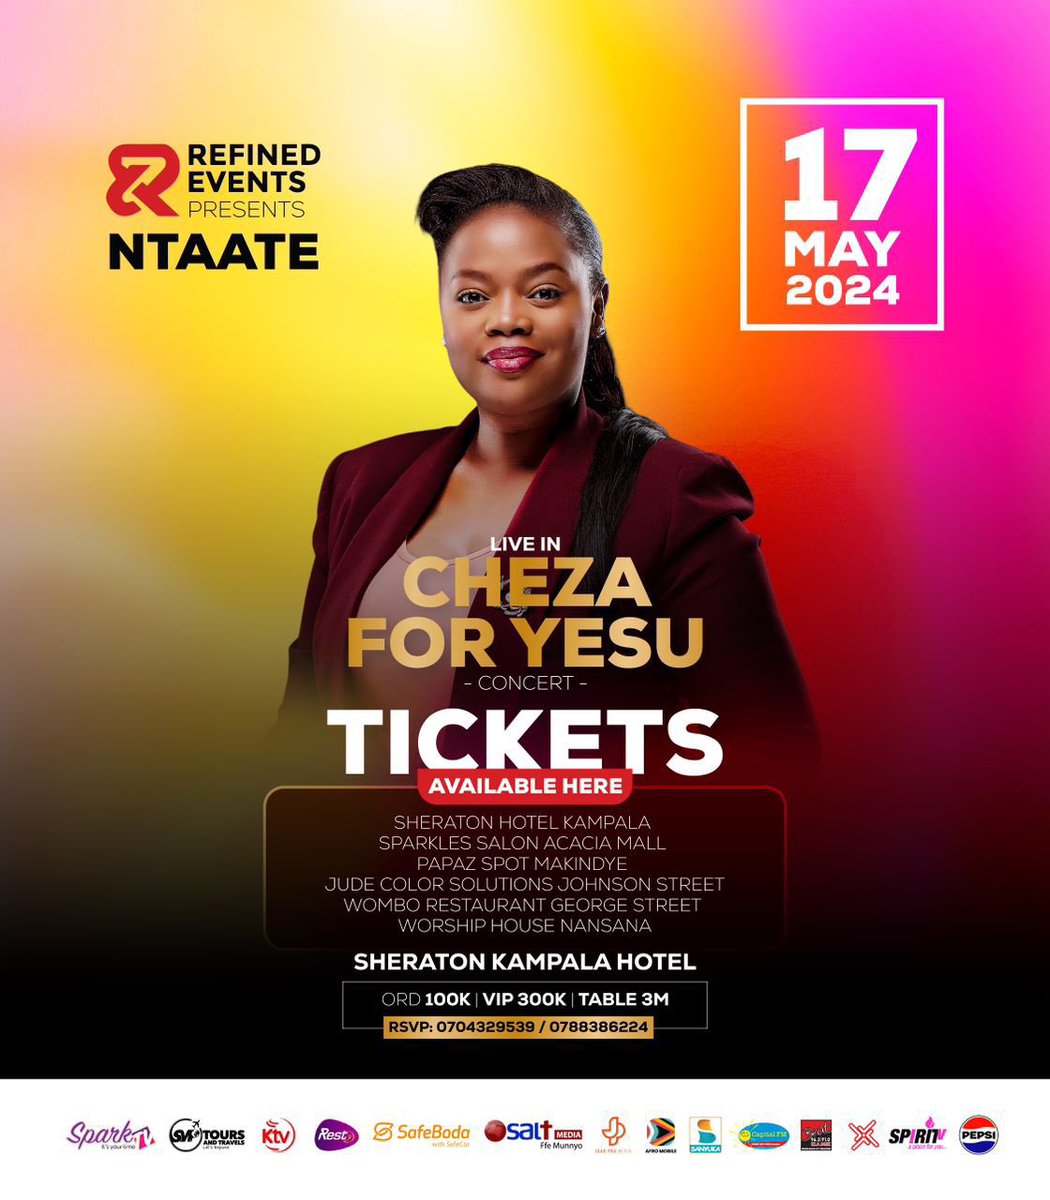 It’s confirmed! The “Cheza for Yesu” hit maker -@Gabientaate will be performing live on stage this Month on the 17th @kampalaserena. Tickets are already on sale at the selected outlets. Come through and let’s #ChezaForYesuConcert